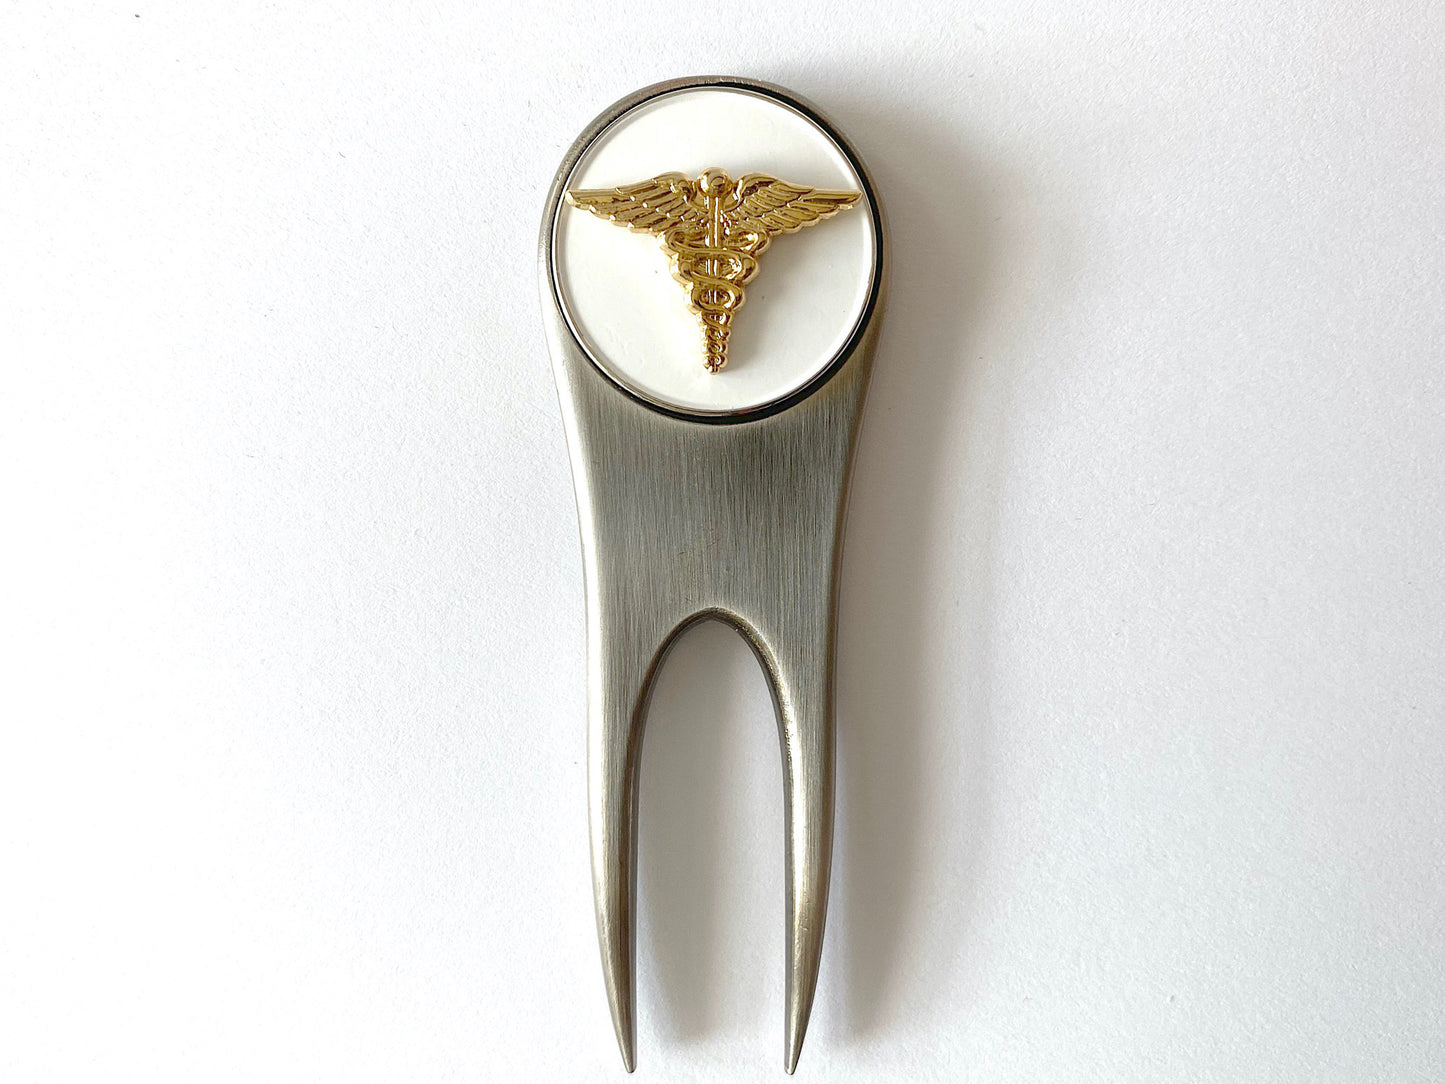 Medical Divot Tool and Ball Marker